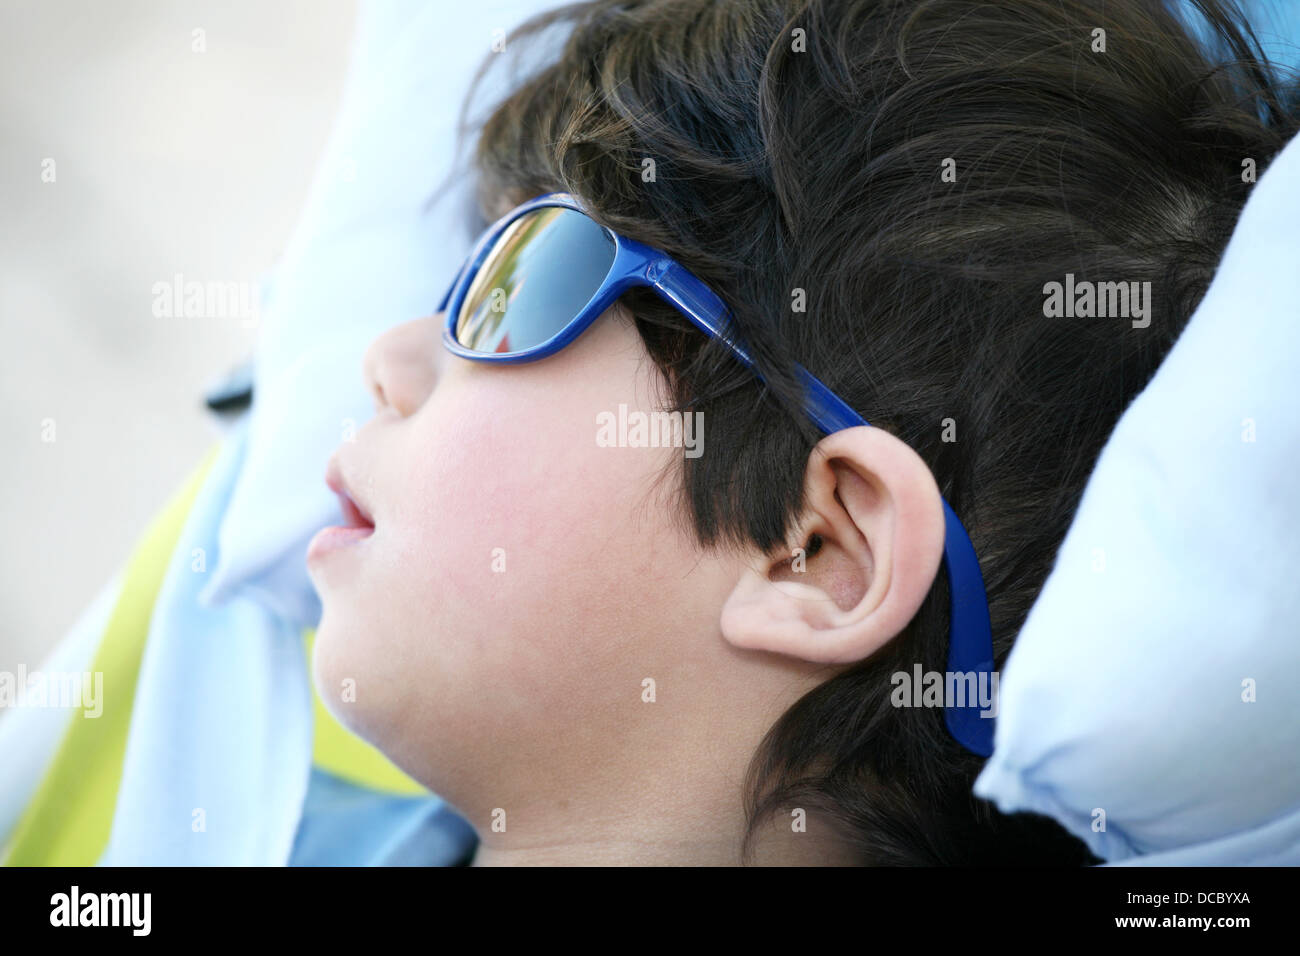 Toddler boy with sunglasses Stock Photo